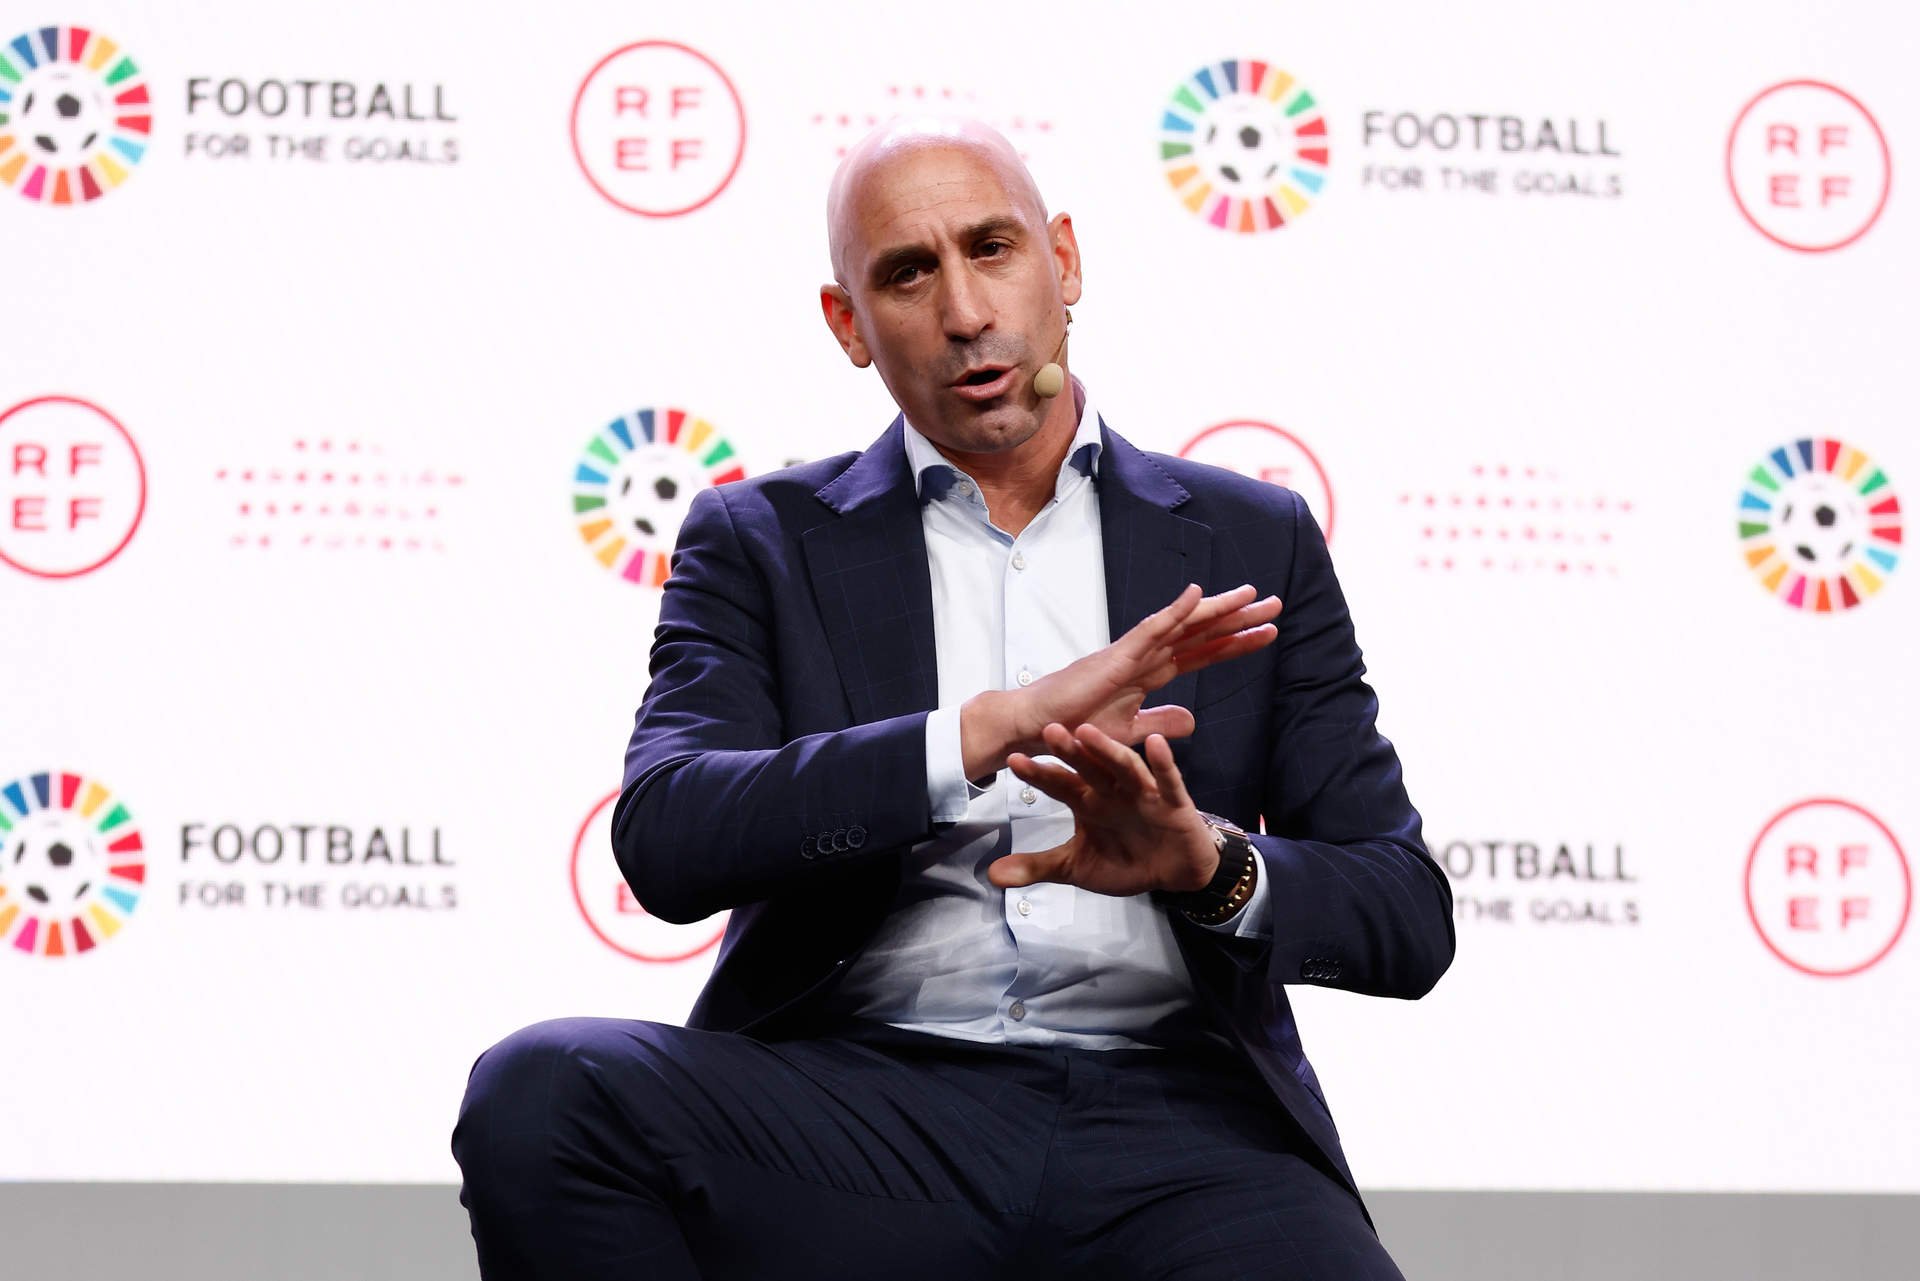 Luis Rubiales, President of Spanish Football Federation RFEF, attends during the presentation of the alliance with the UN of the commitment to human rights and sustainability by joining the #FootballForTheGoals initiative at Ciudad del Futbol on november 15, 2022, in Las Rozas, Madrid, Spain.